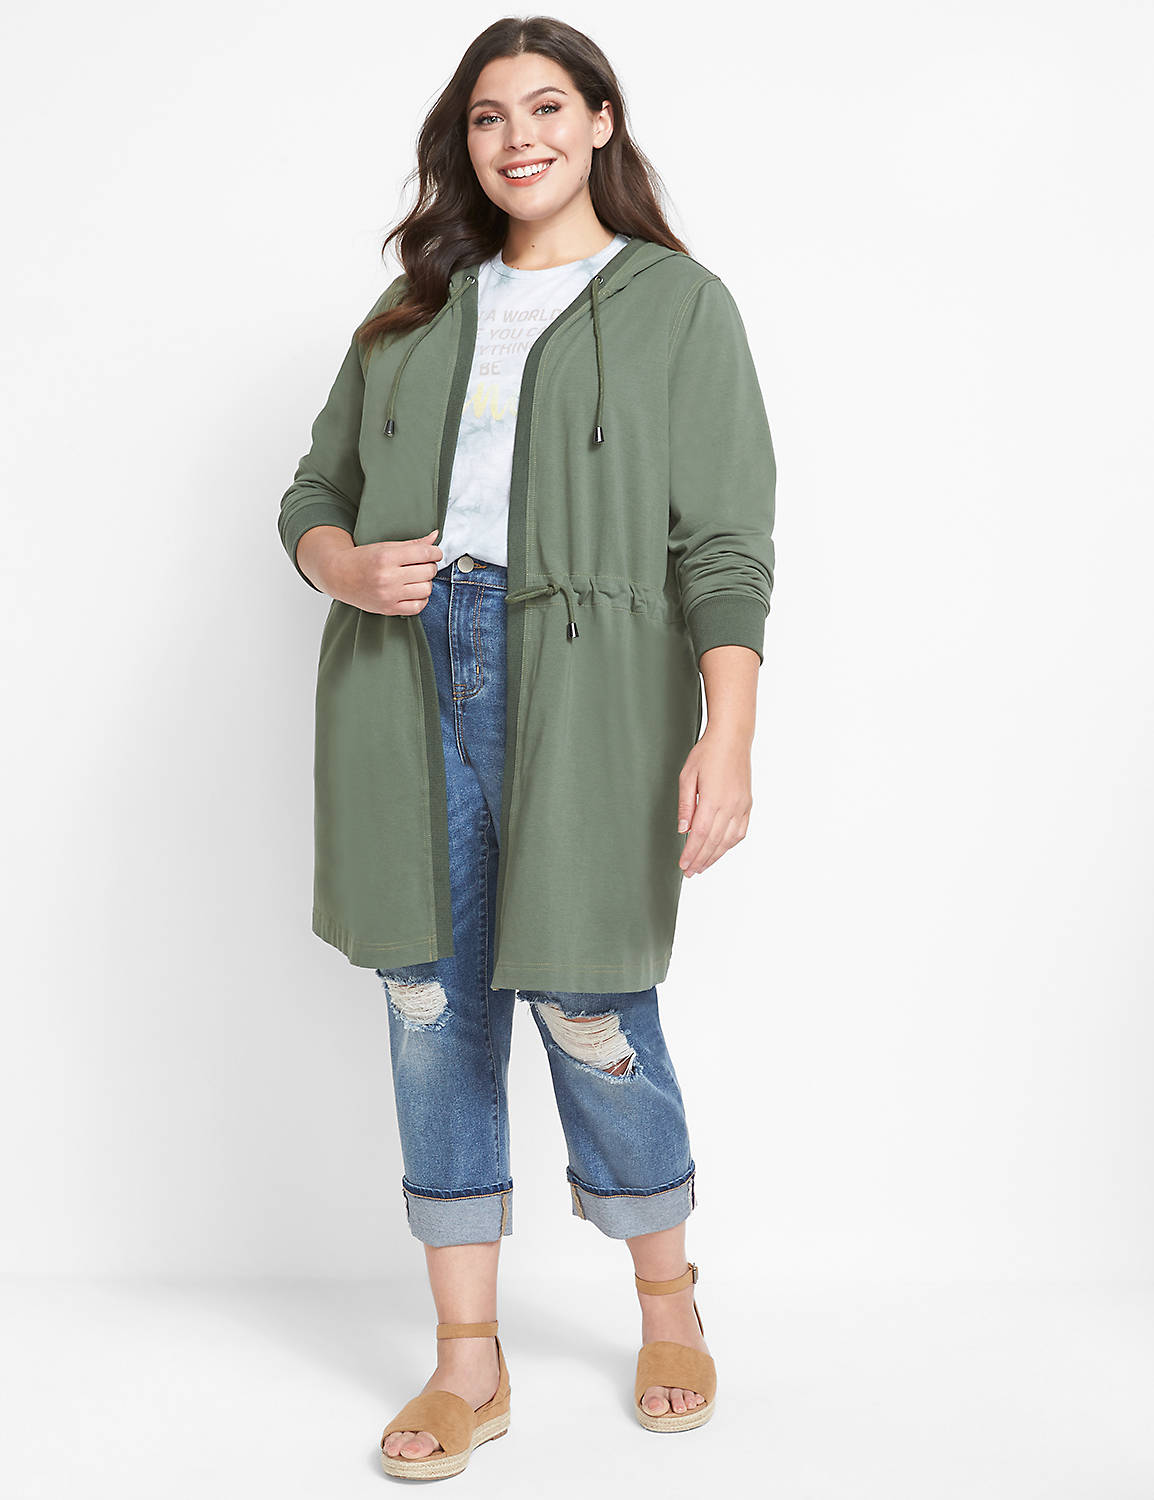 French Terry Casual Anorak 1125161 Product Image 1